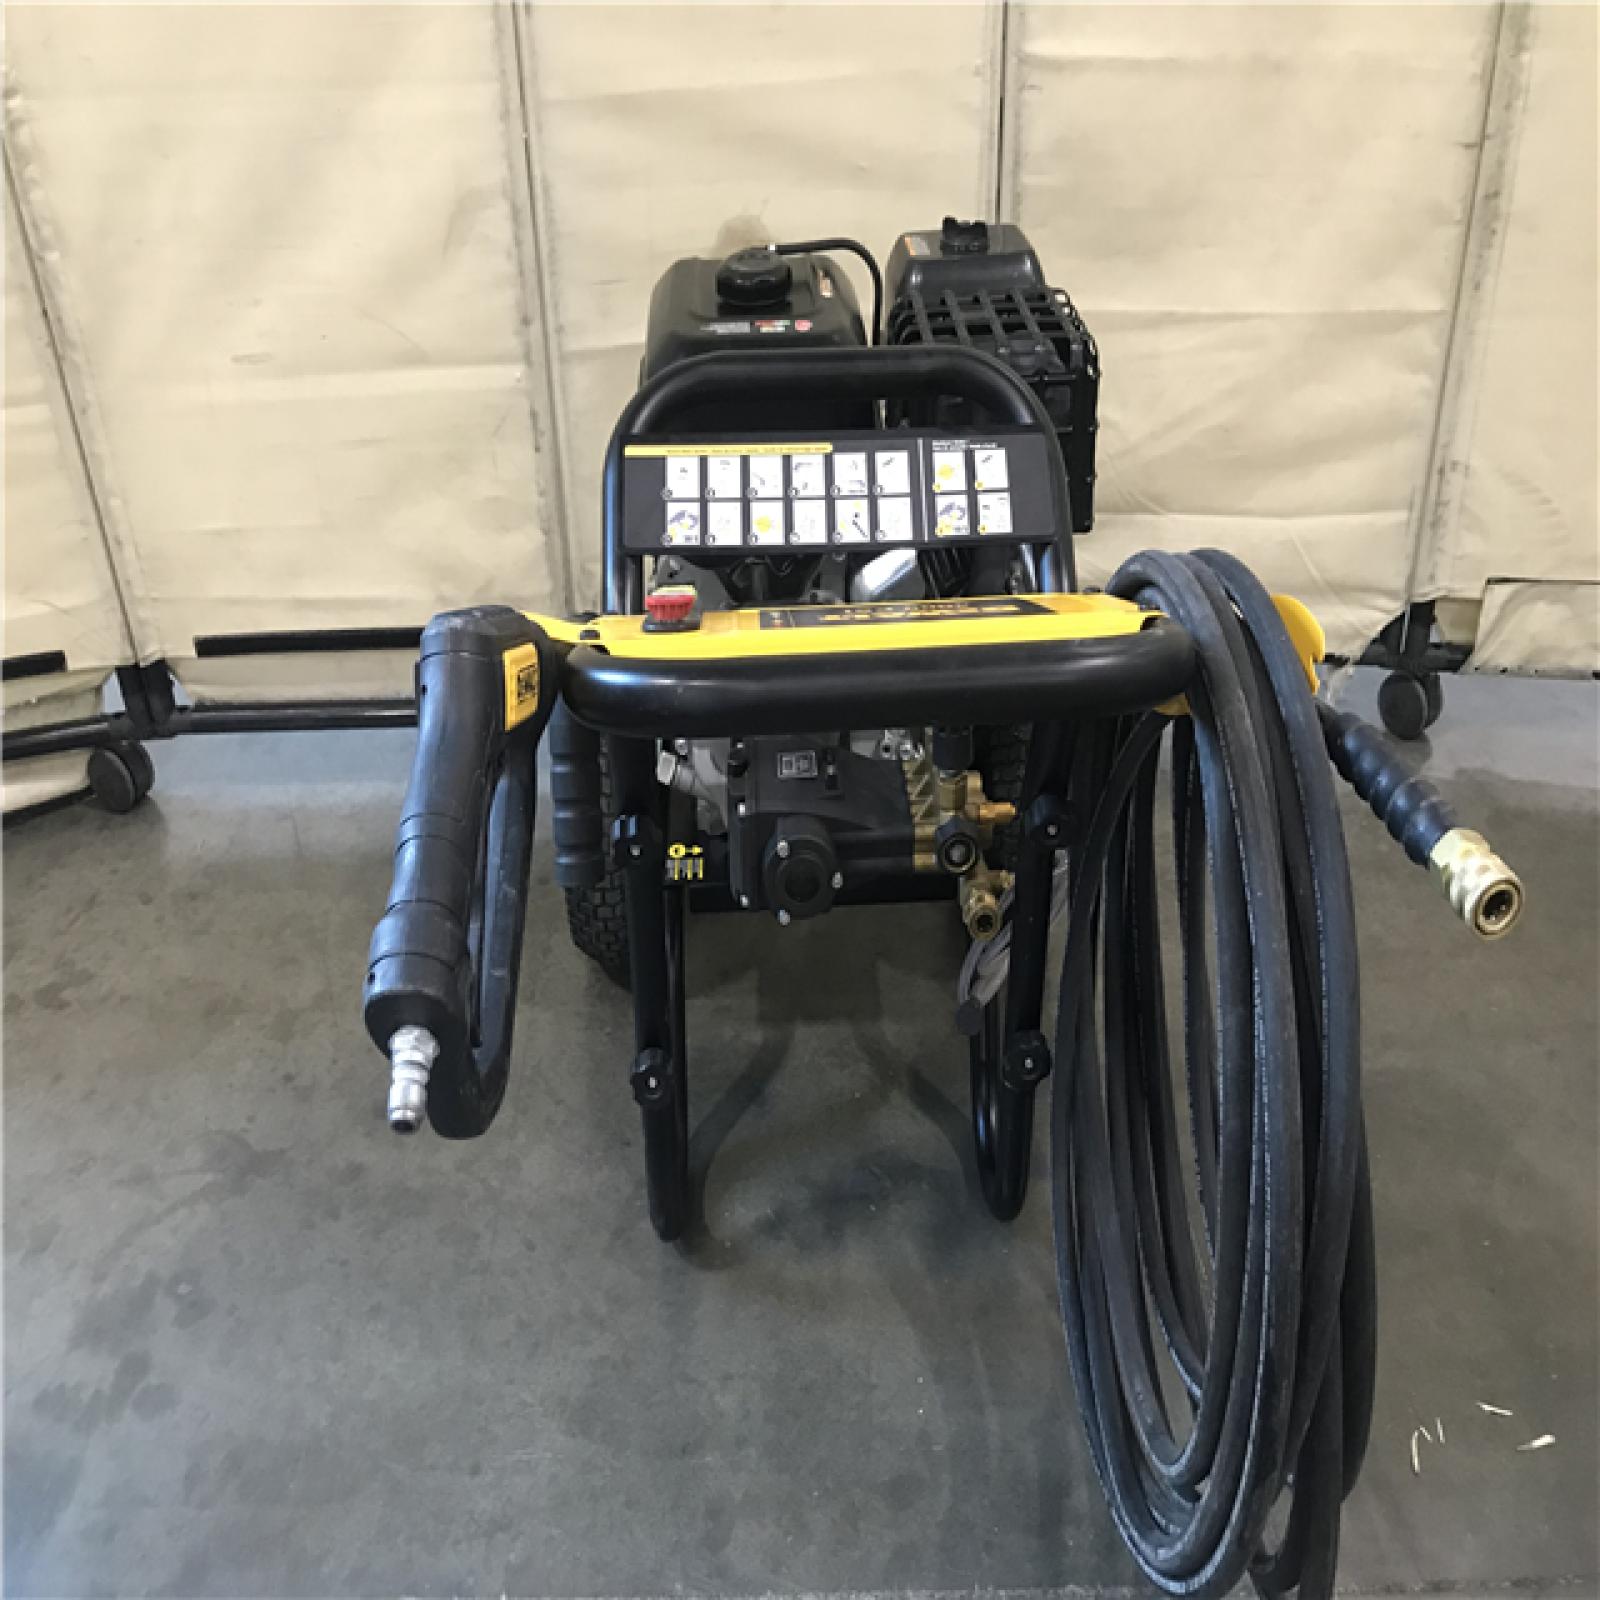 California AS-IS DeWALT 4000 PSI 3.5 GPM Cold Water Gas Pressure Washer